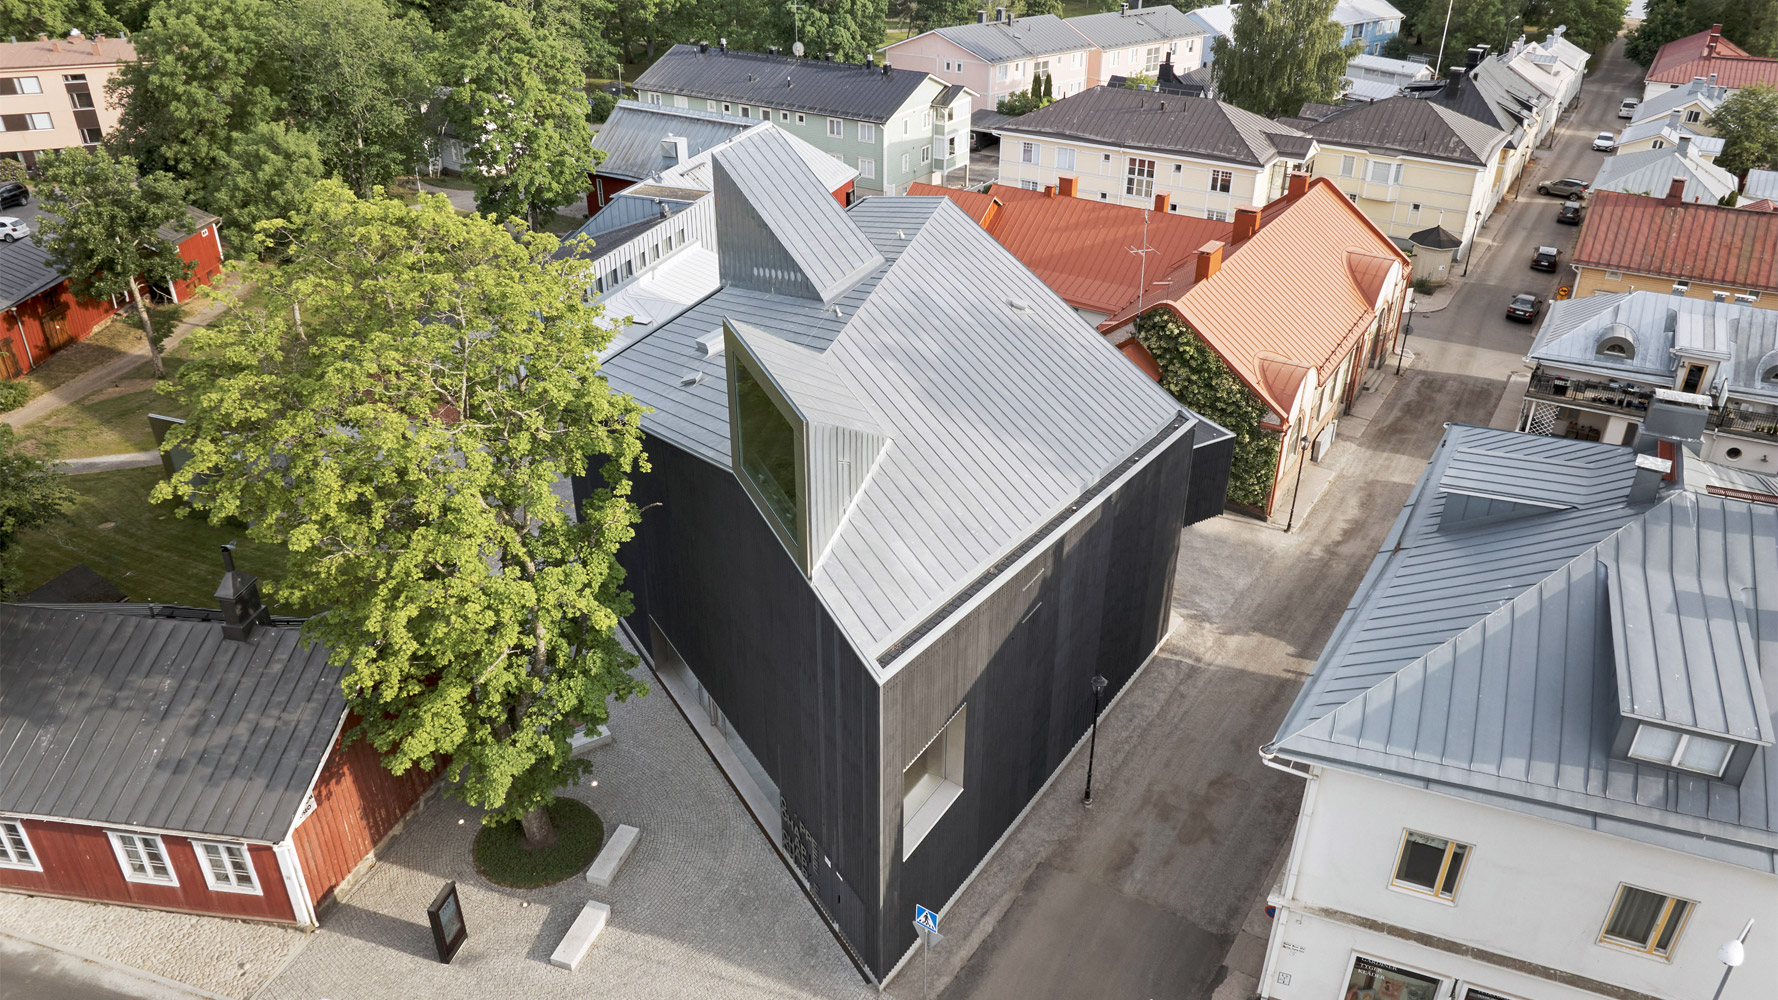 In Finland, JKMM Shoehorns the Chappe Art House into a Historic Town